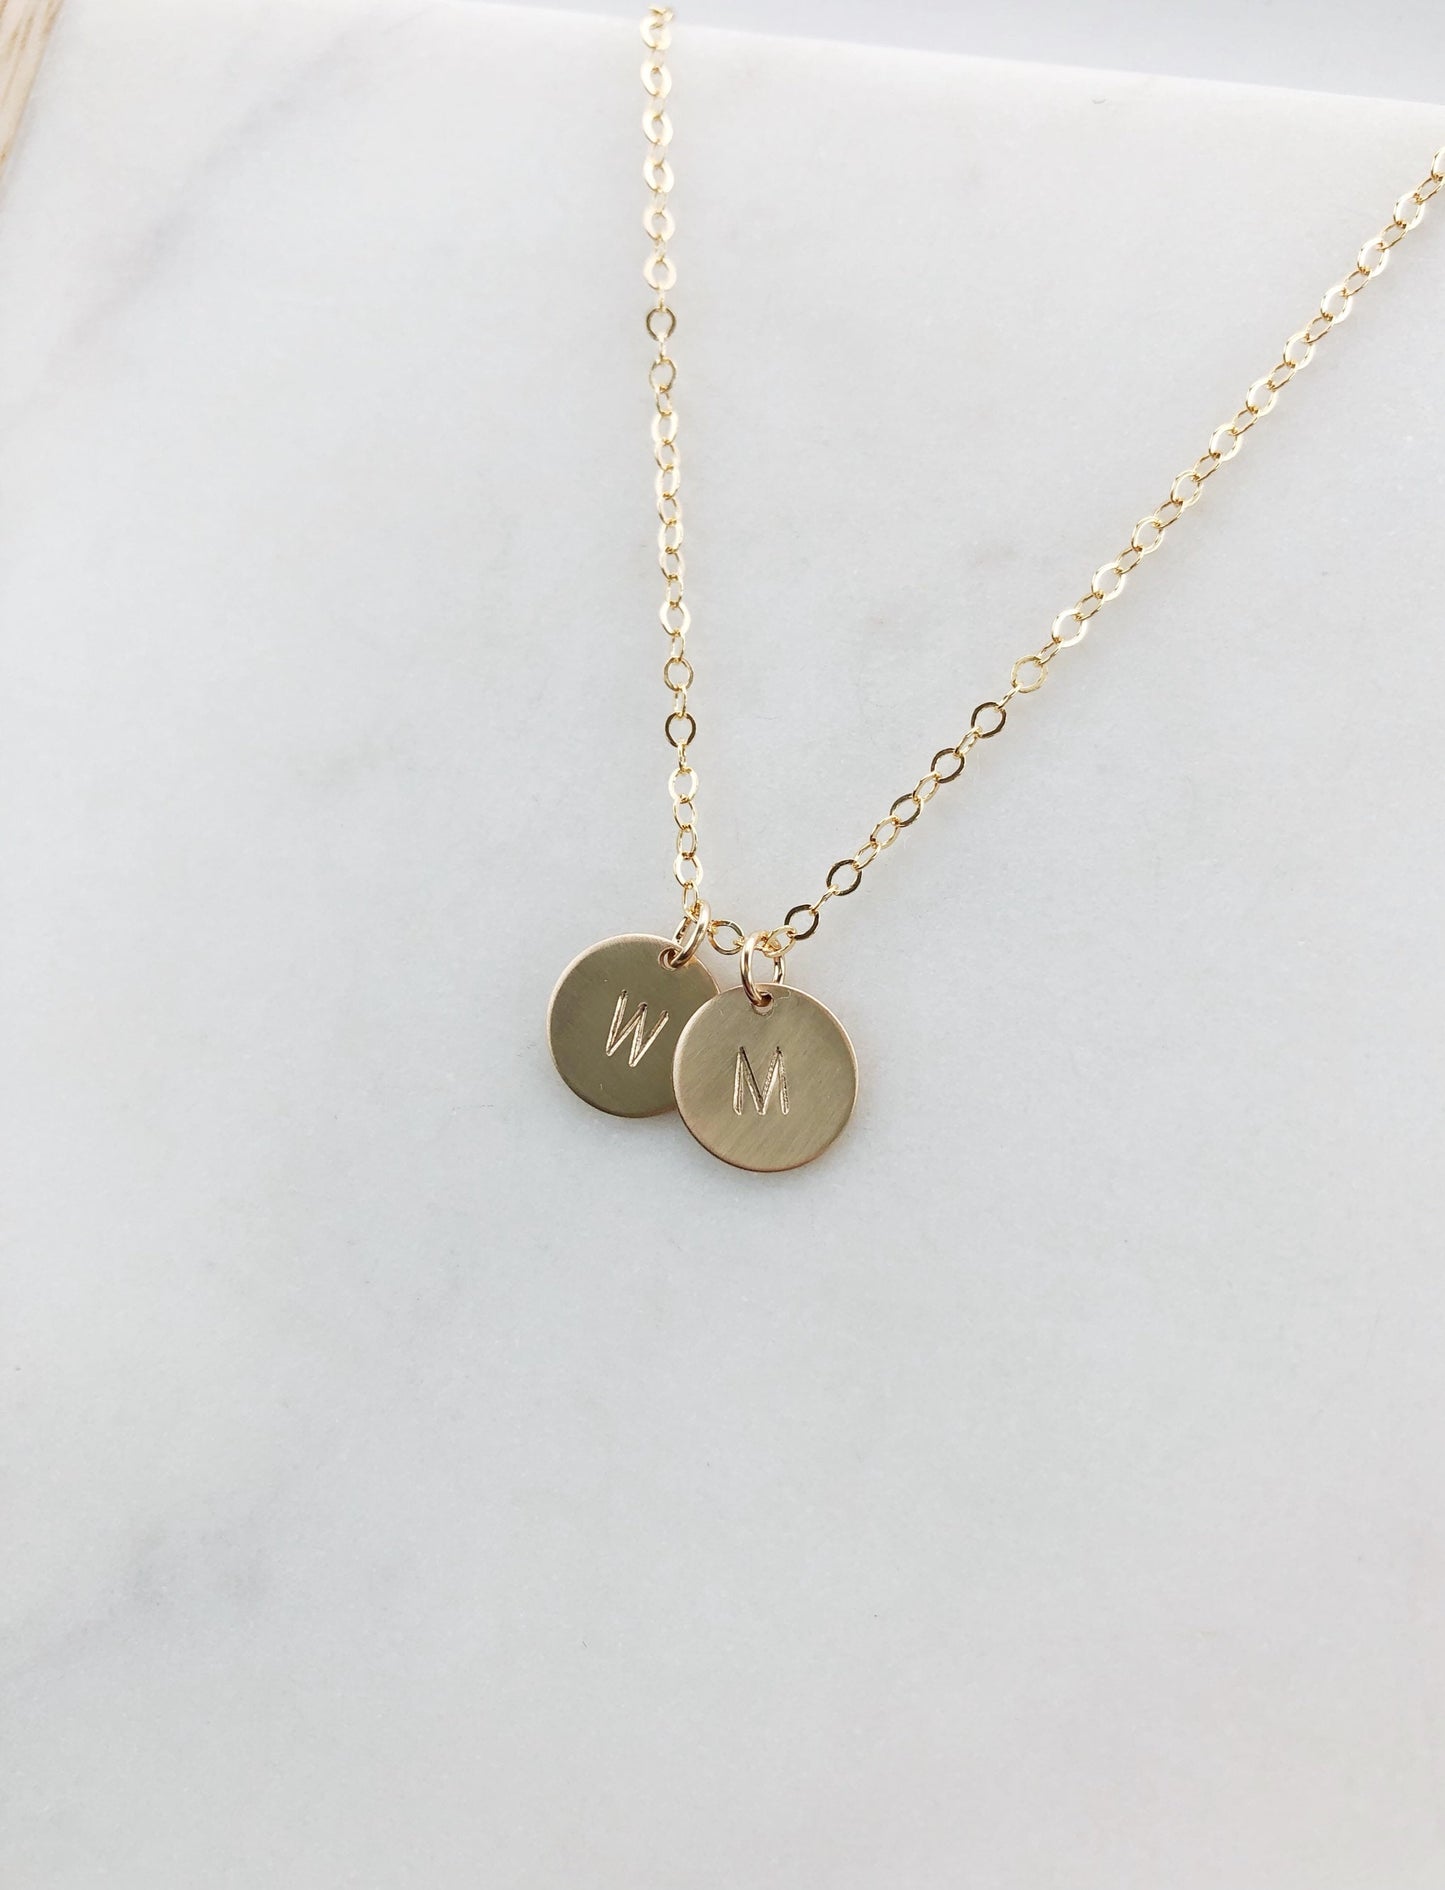 Personalized initial necklace gift, initial necklace, Gold necklace, simple necklace, gift for women, dainty jewelry, dainty necklaces